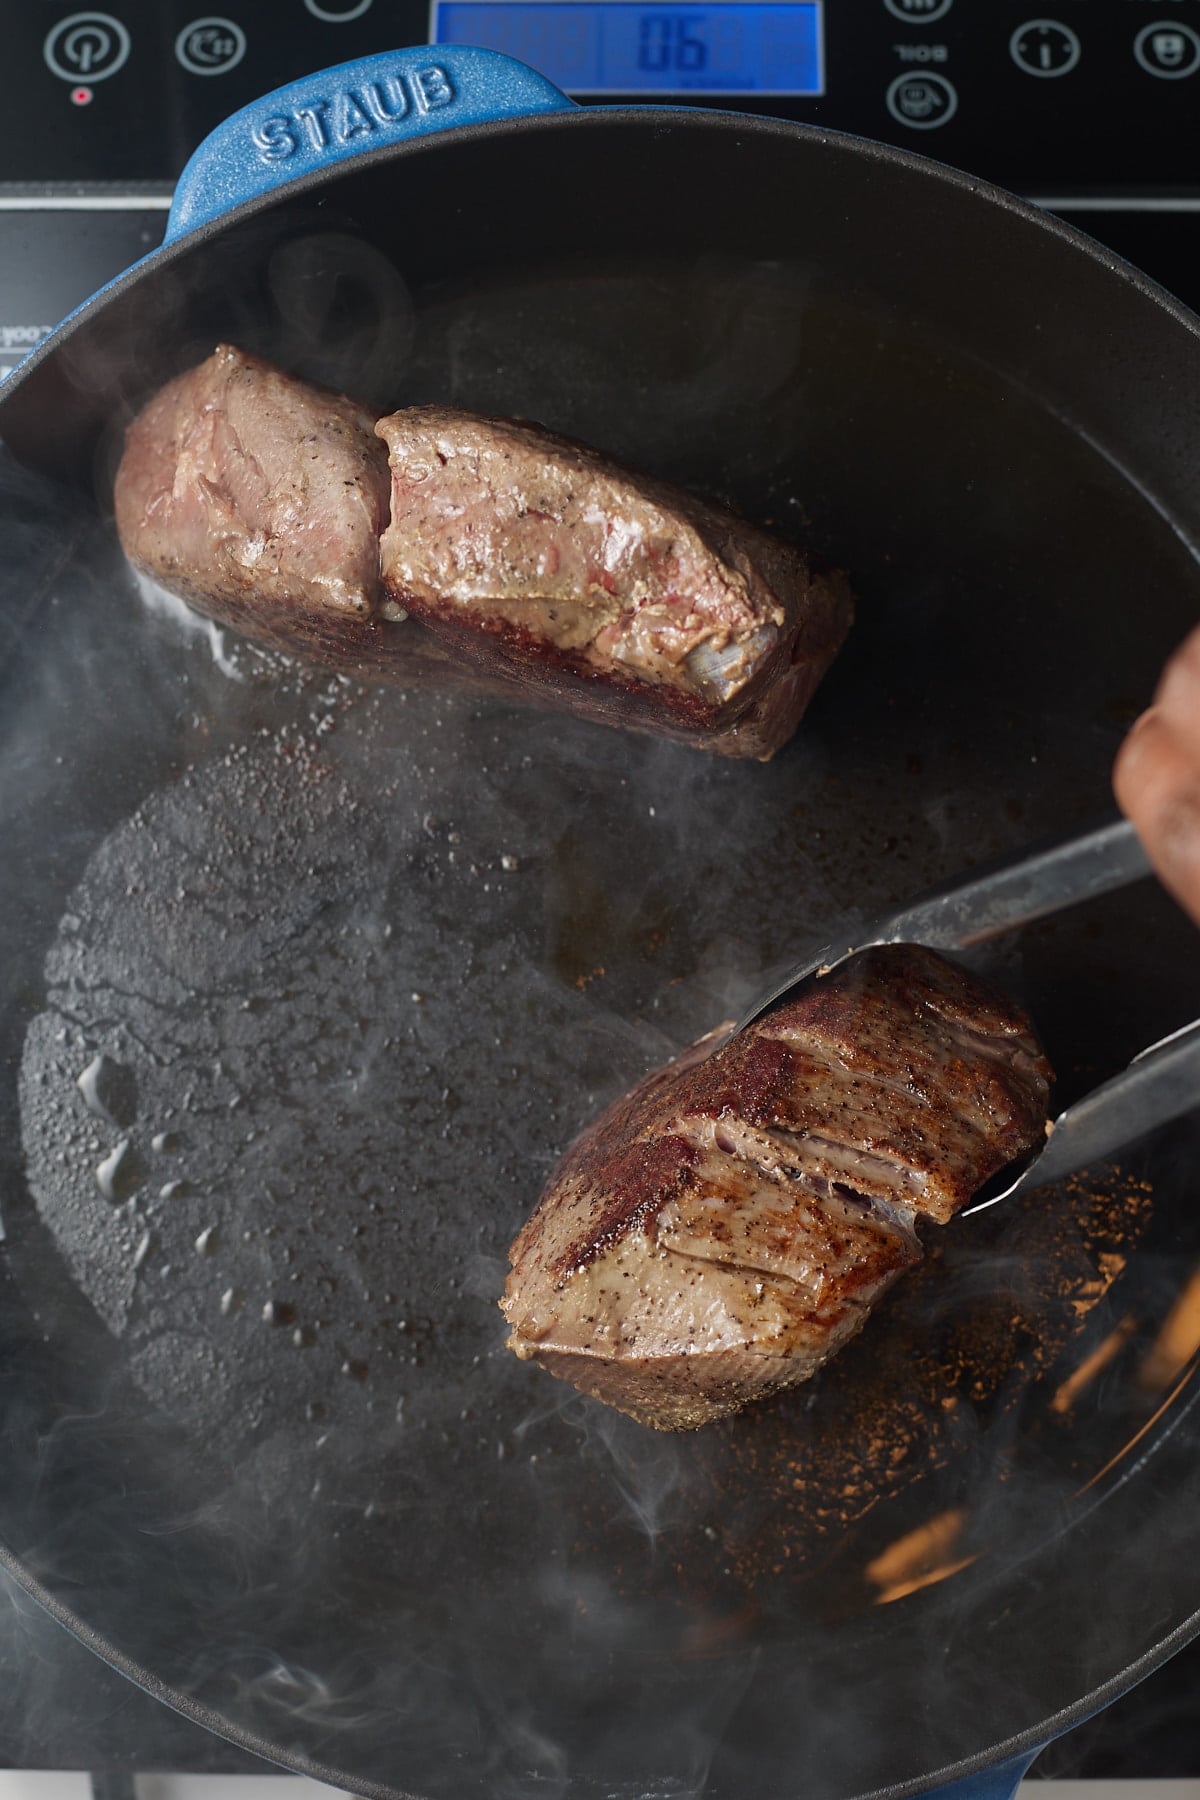 Searing the steaks in a hot pan.